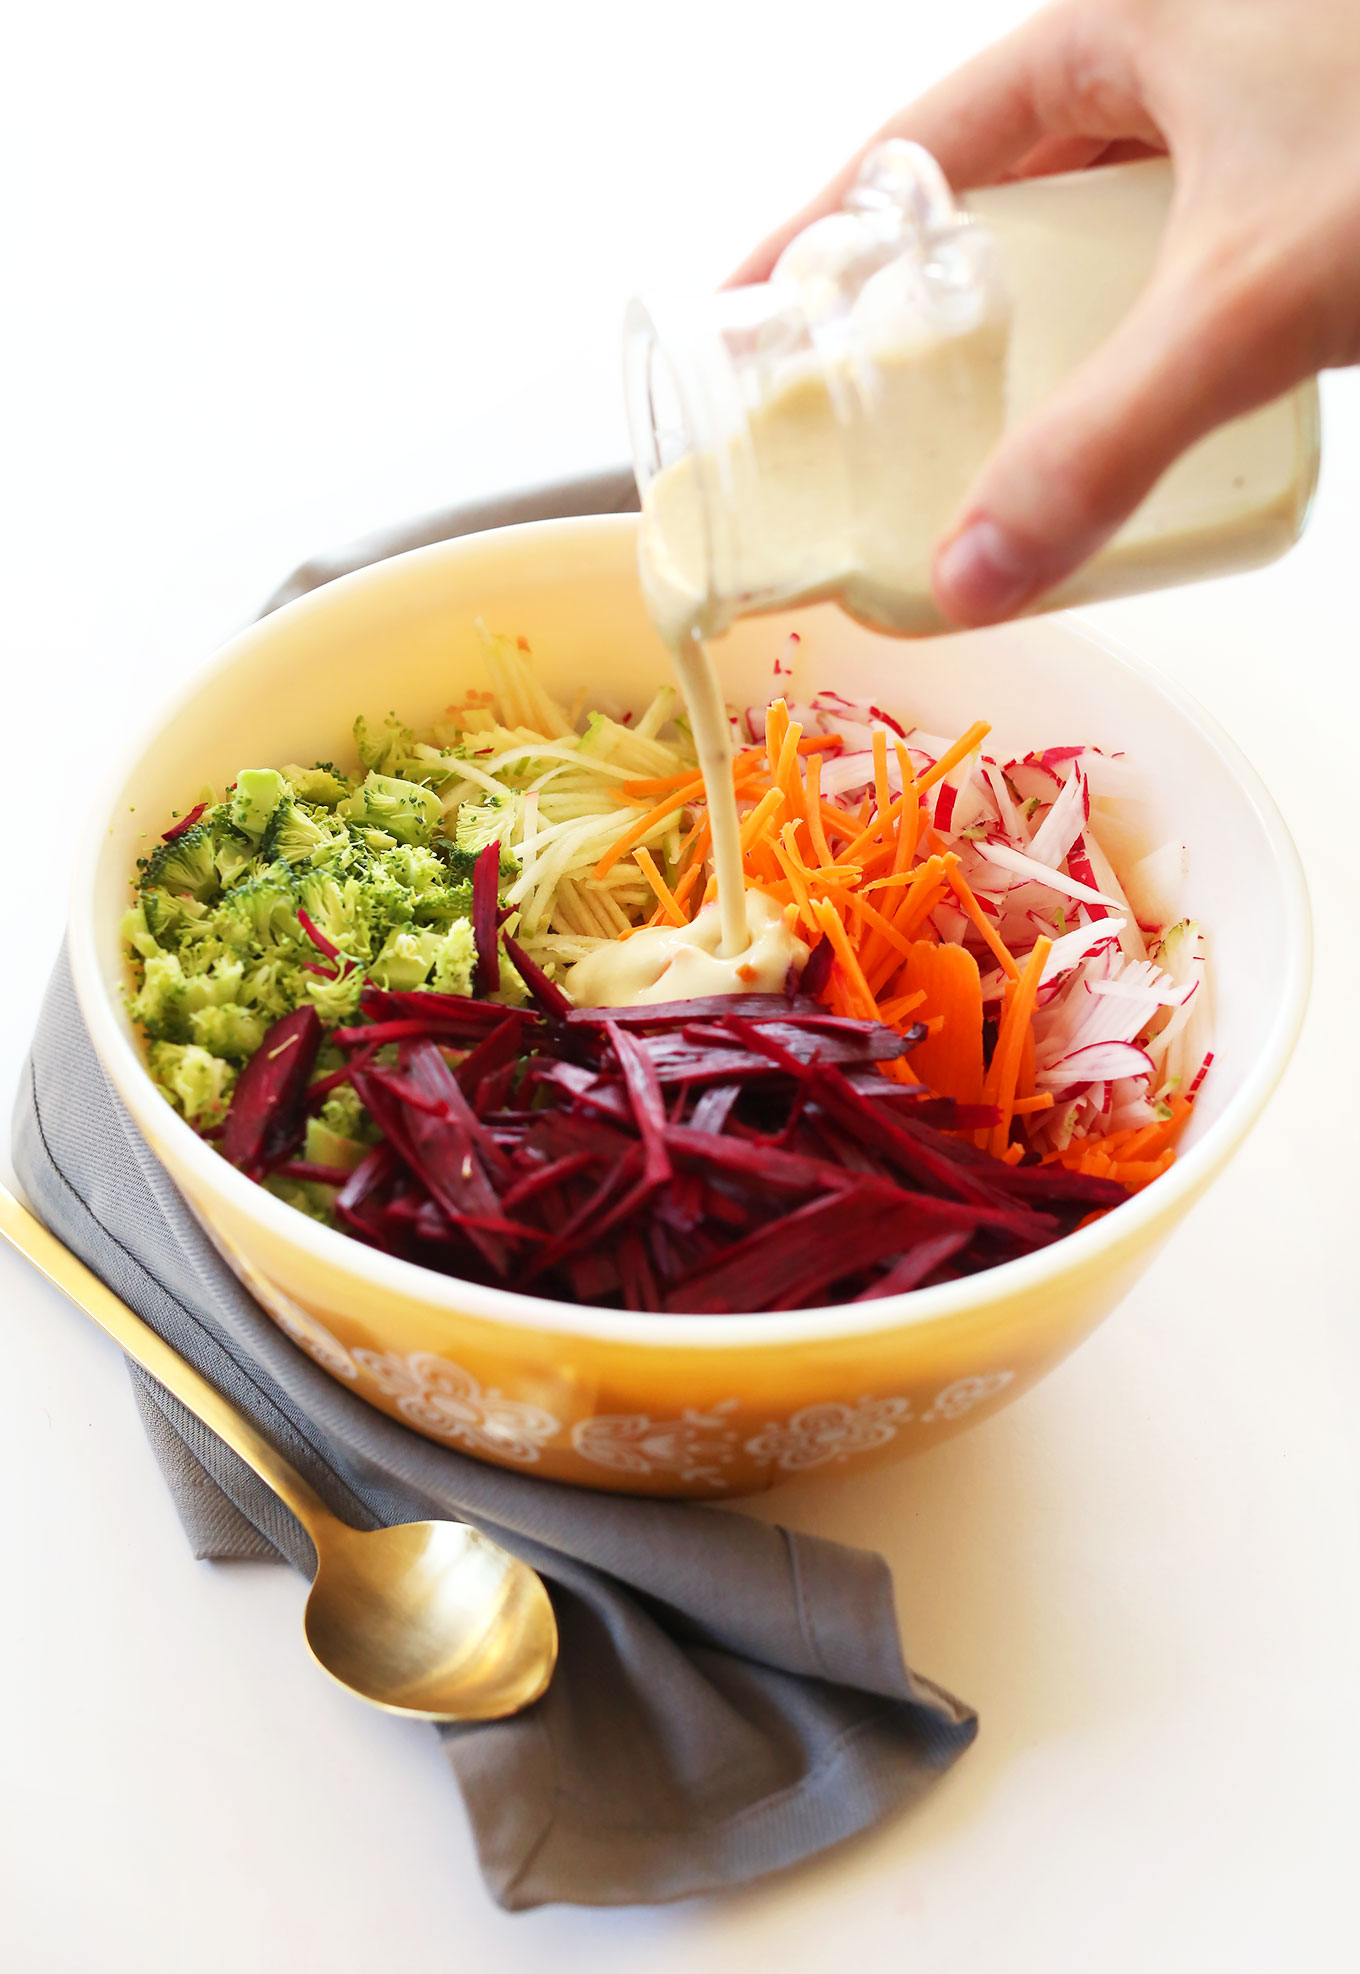 Pouring creamy vegan dressing onto our fall slaw